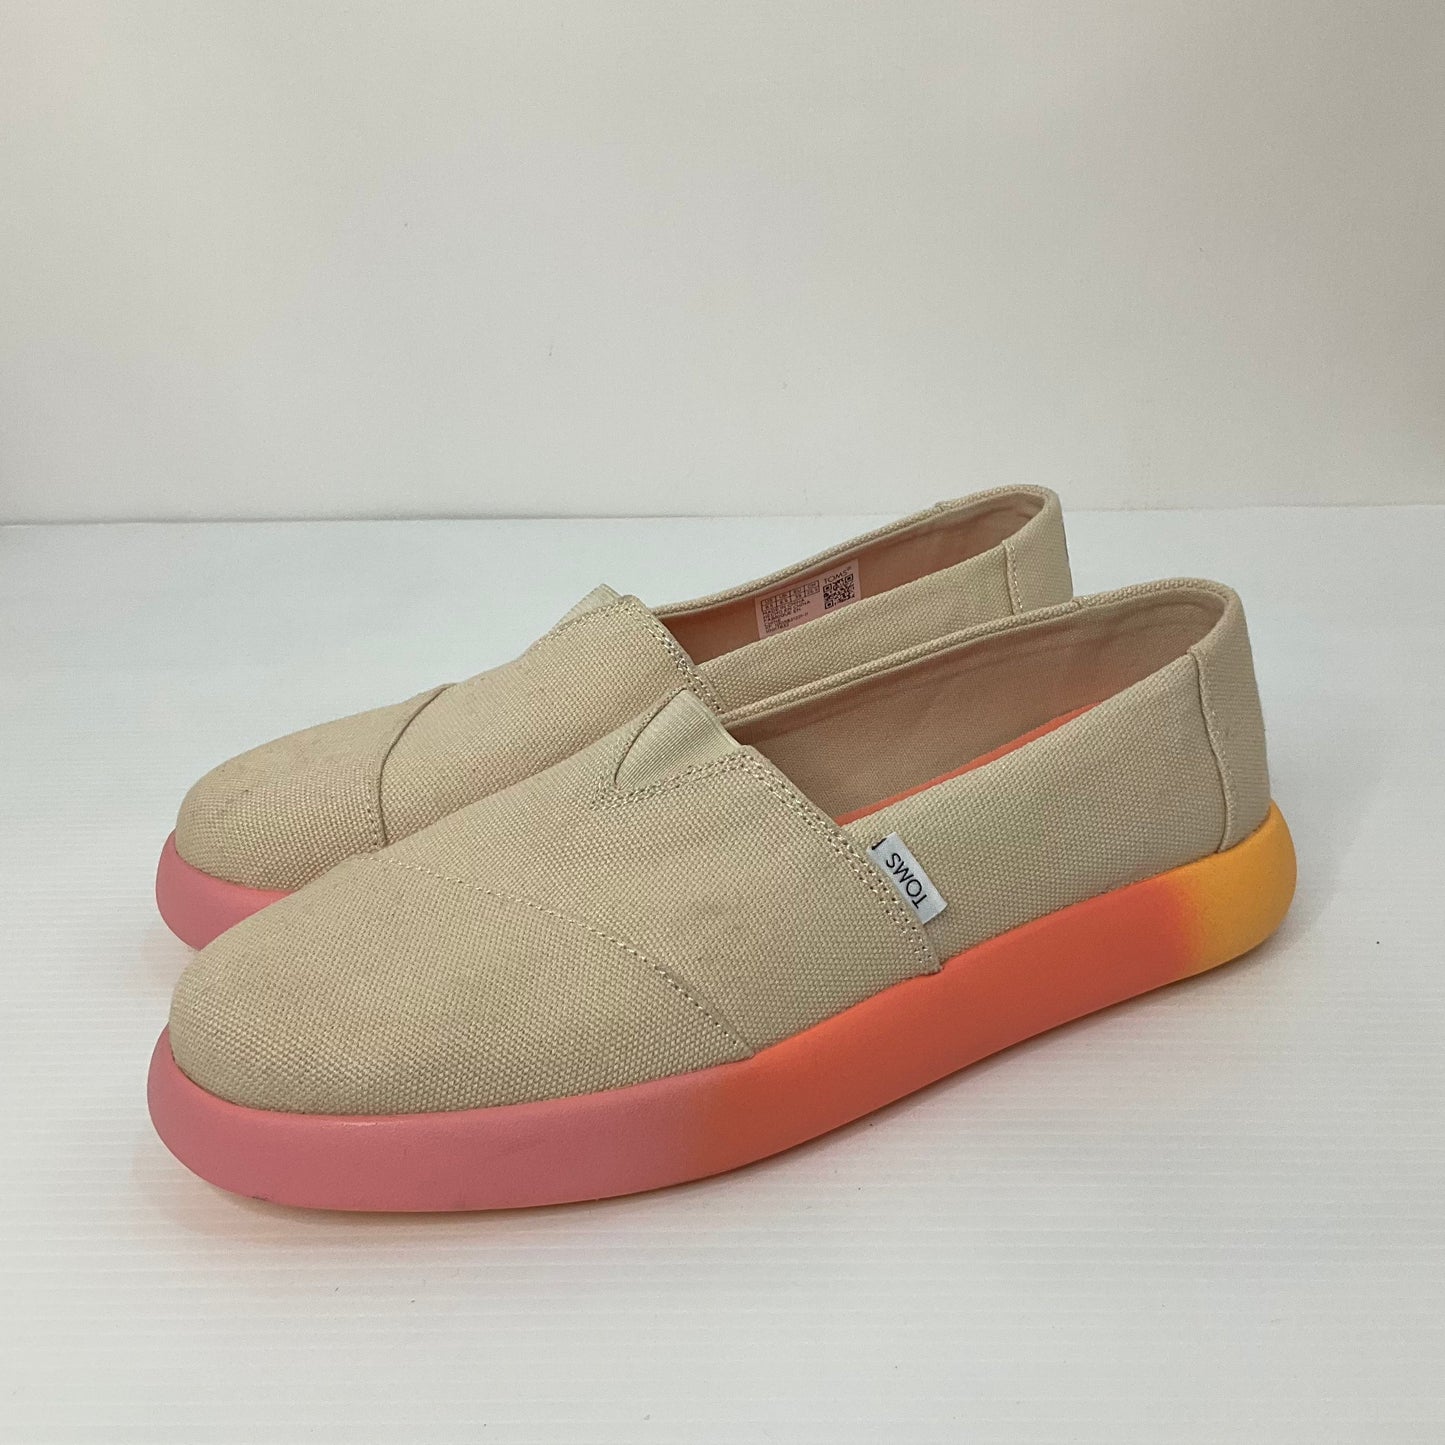 Tan Shoes Sneakers Toms, Size 8.5